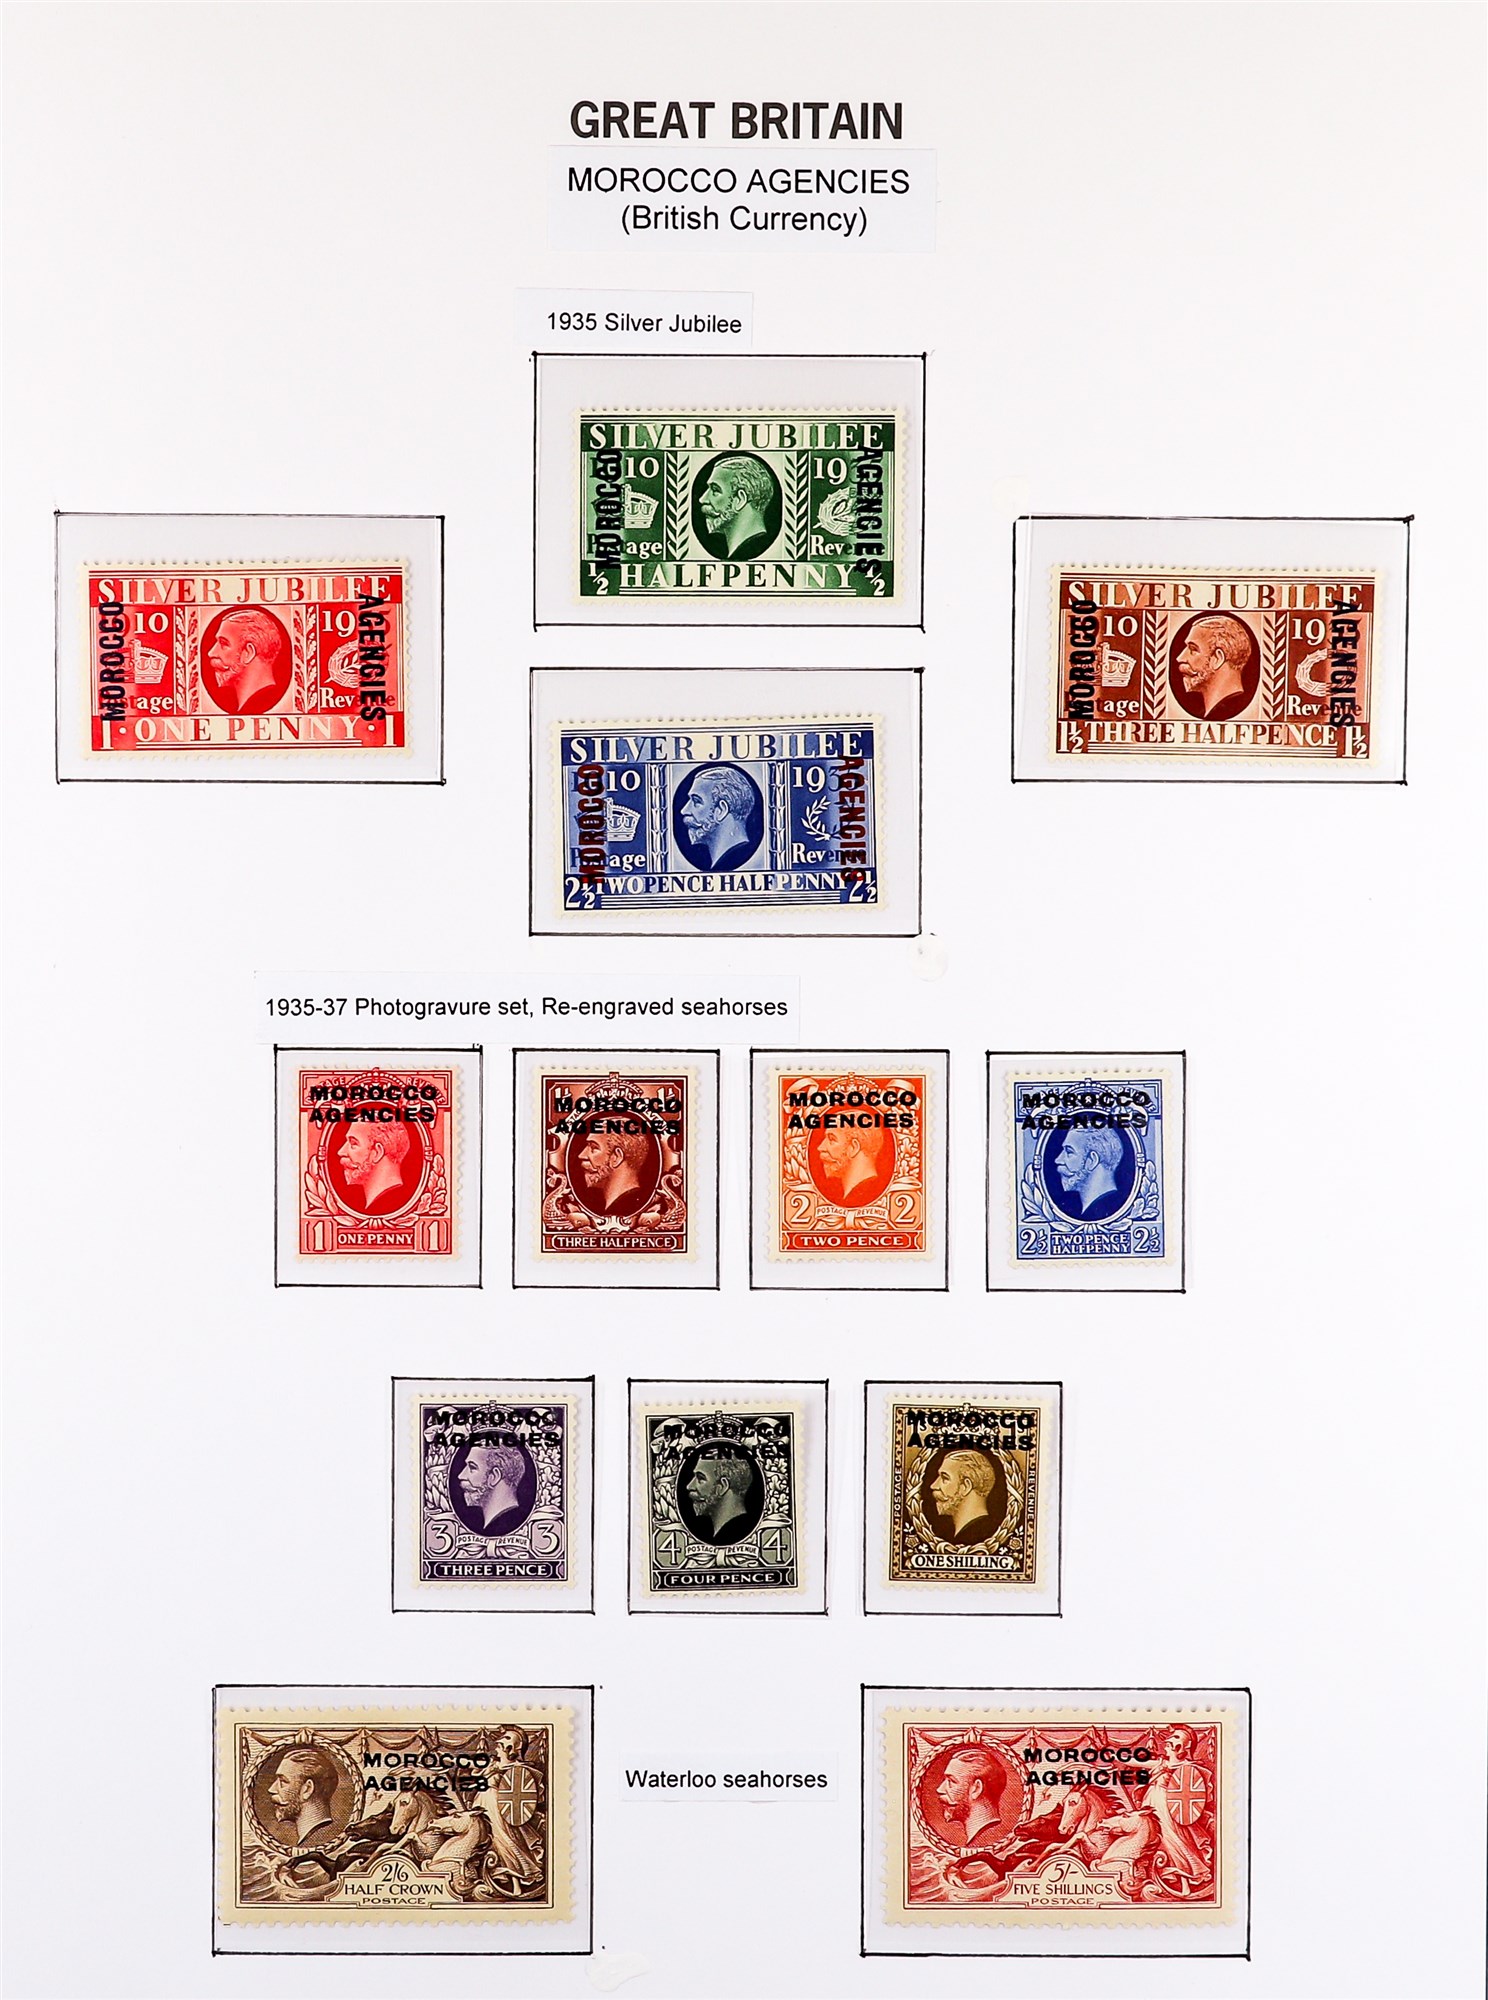 MOROCCO AGENCIES BRITISH CURRENCY 1914 - 1937 collection of over 30 mint stamps on pages, note - Image 2 of 2